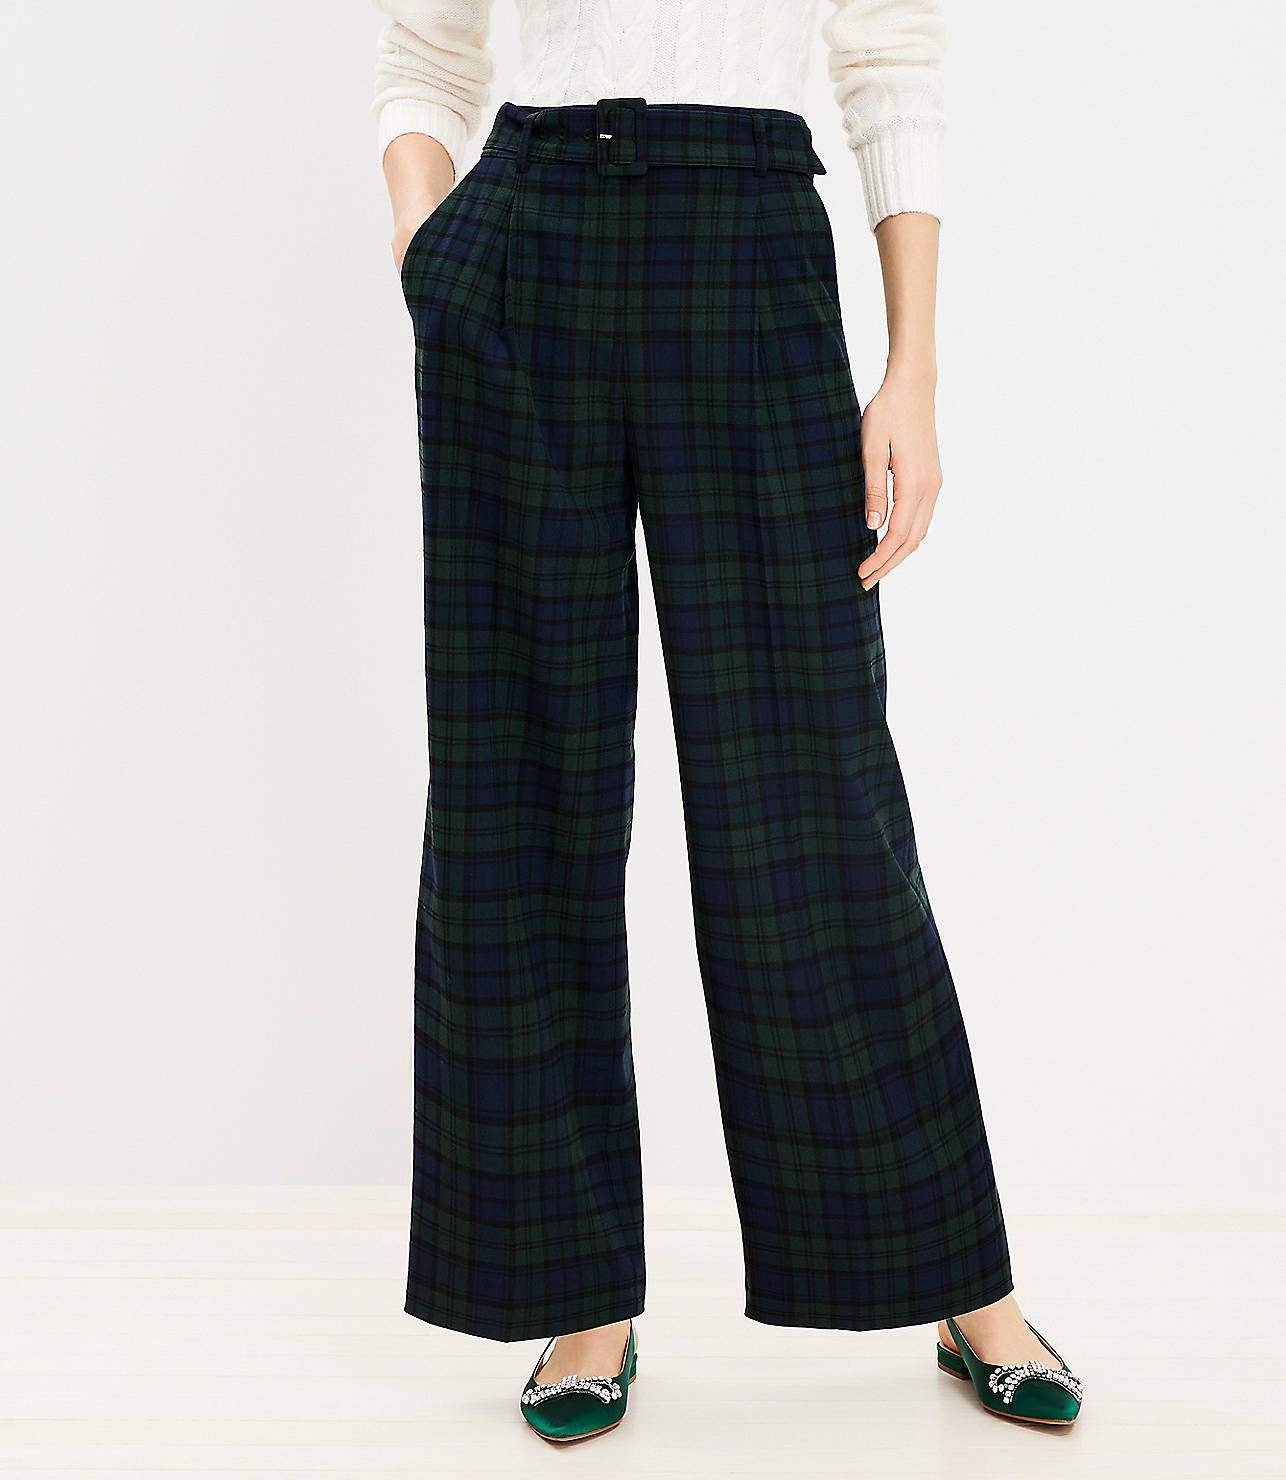 Belted Wide Leg Pants in Plaid Brushed Flannel